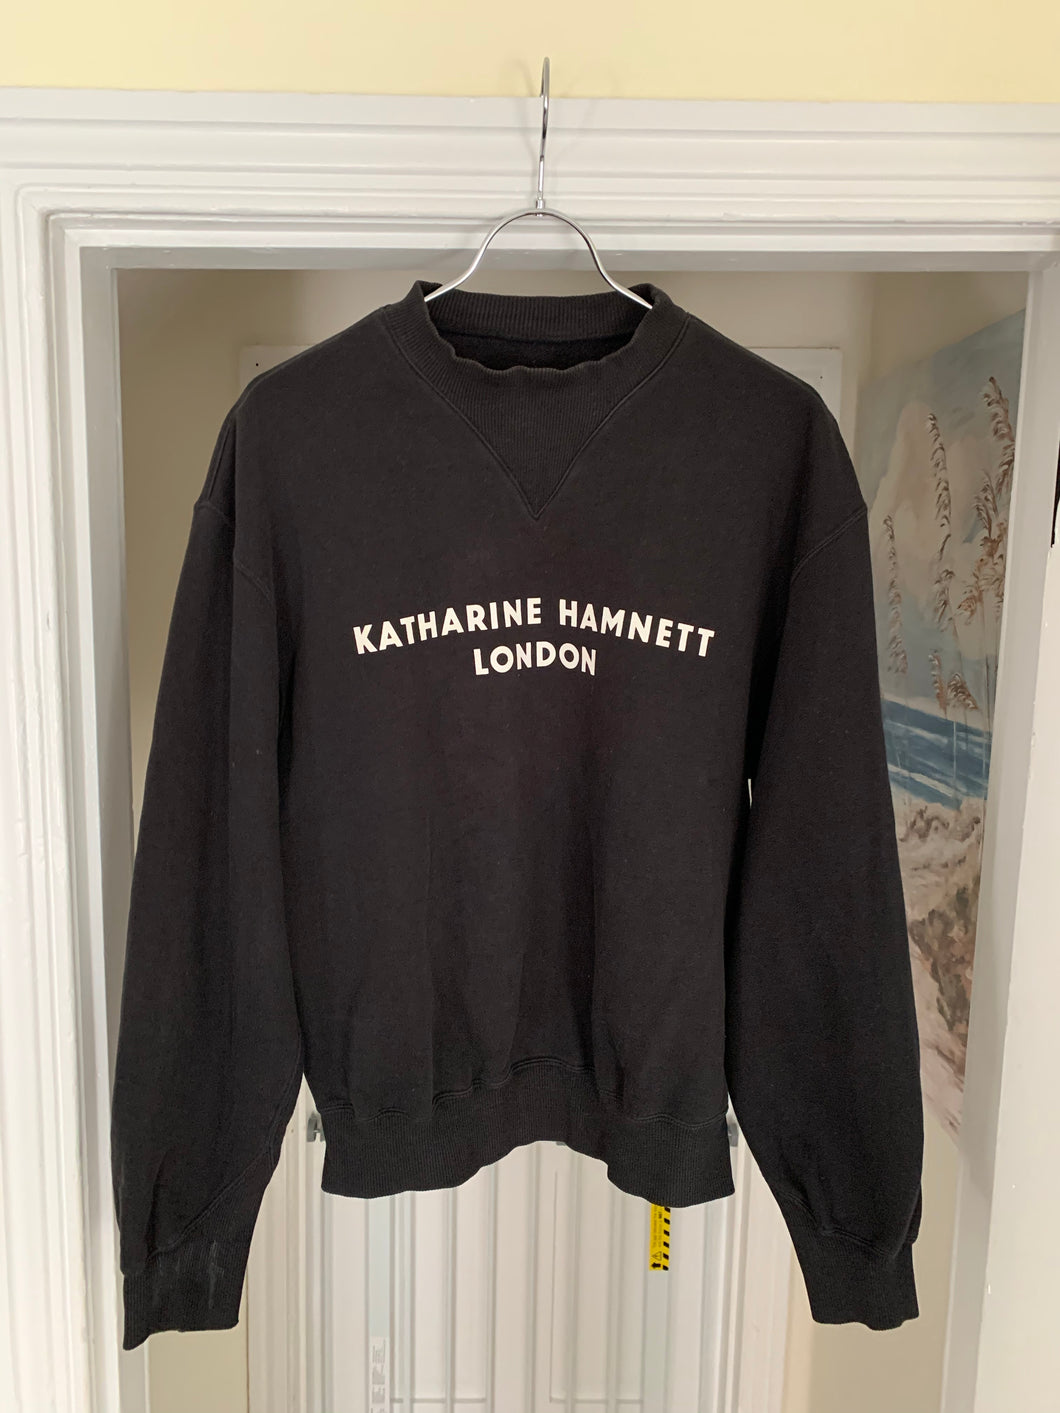 1990s Katharine Hamnett Logo Crewneck with Articulated Neck and Cuff Ribbing - Size L